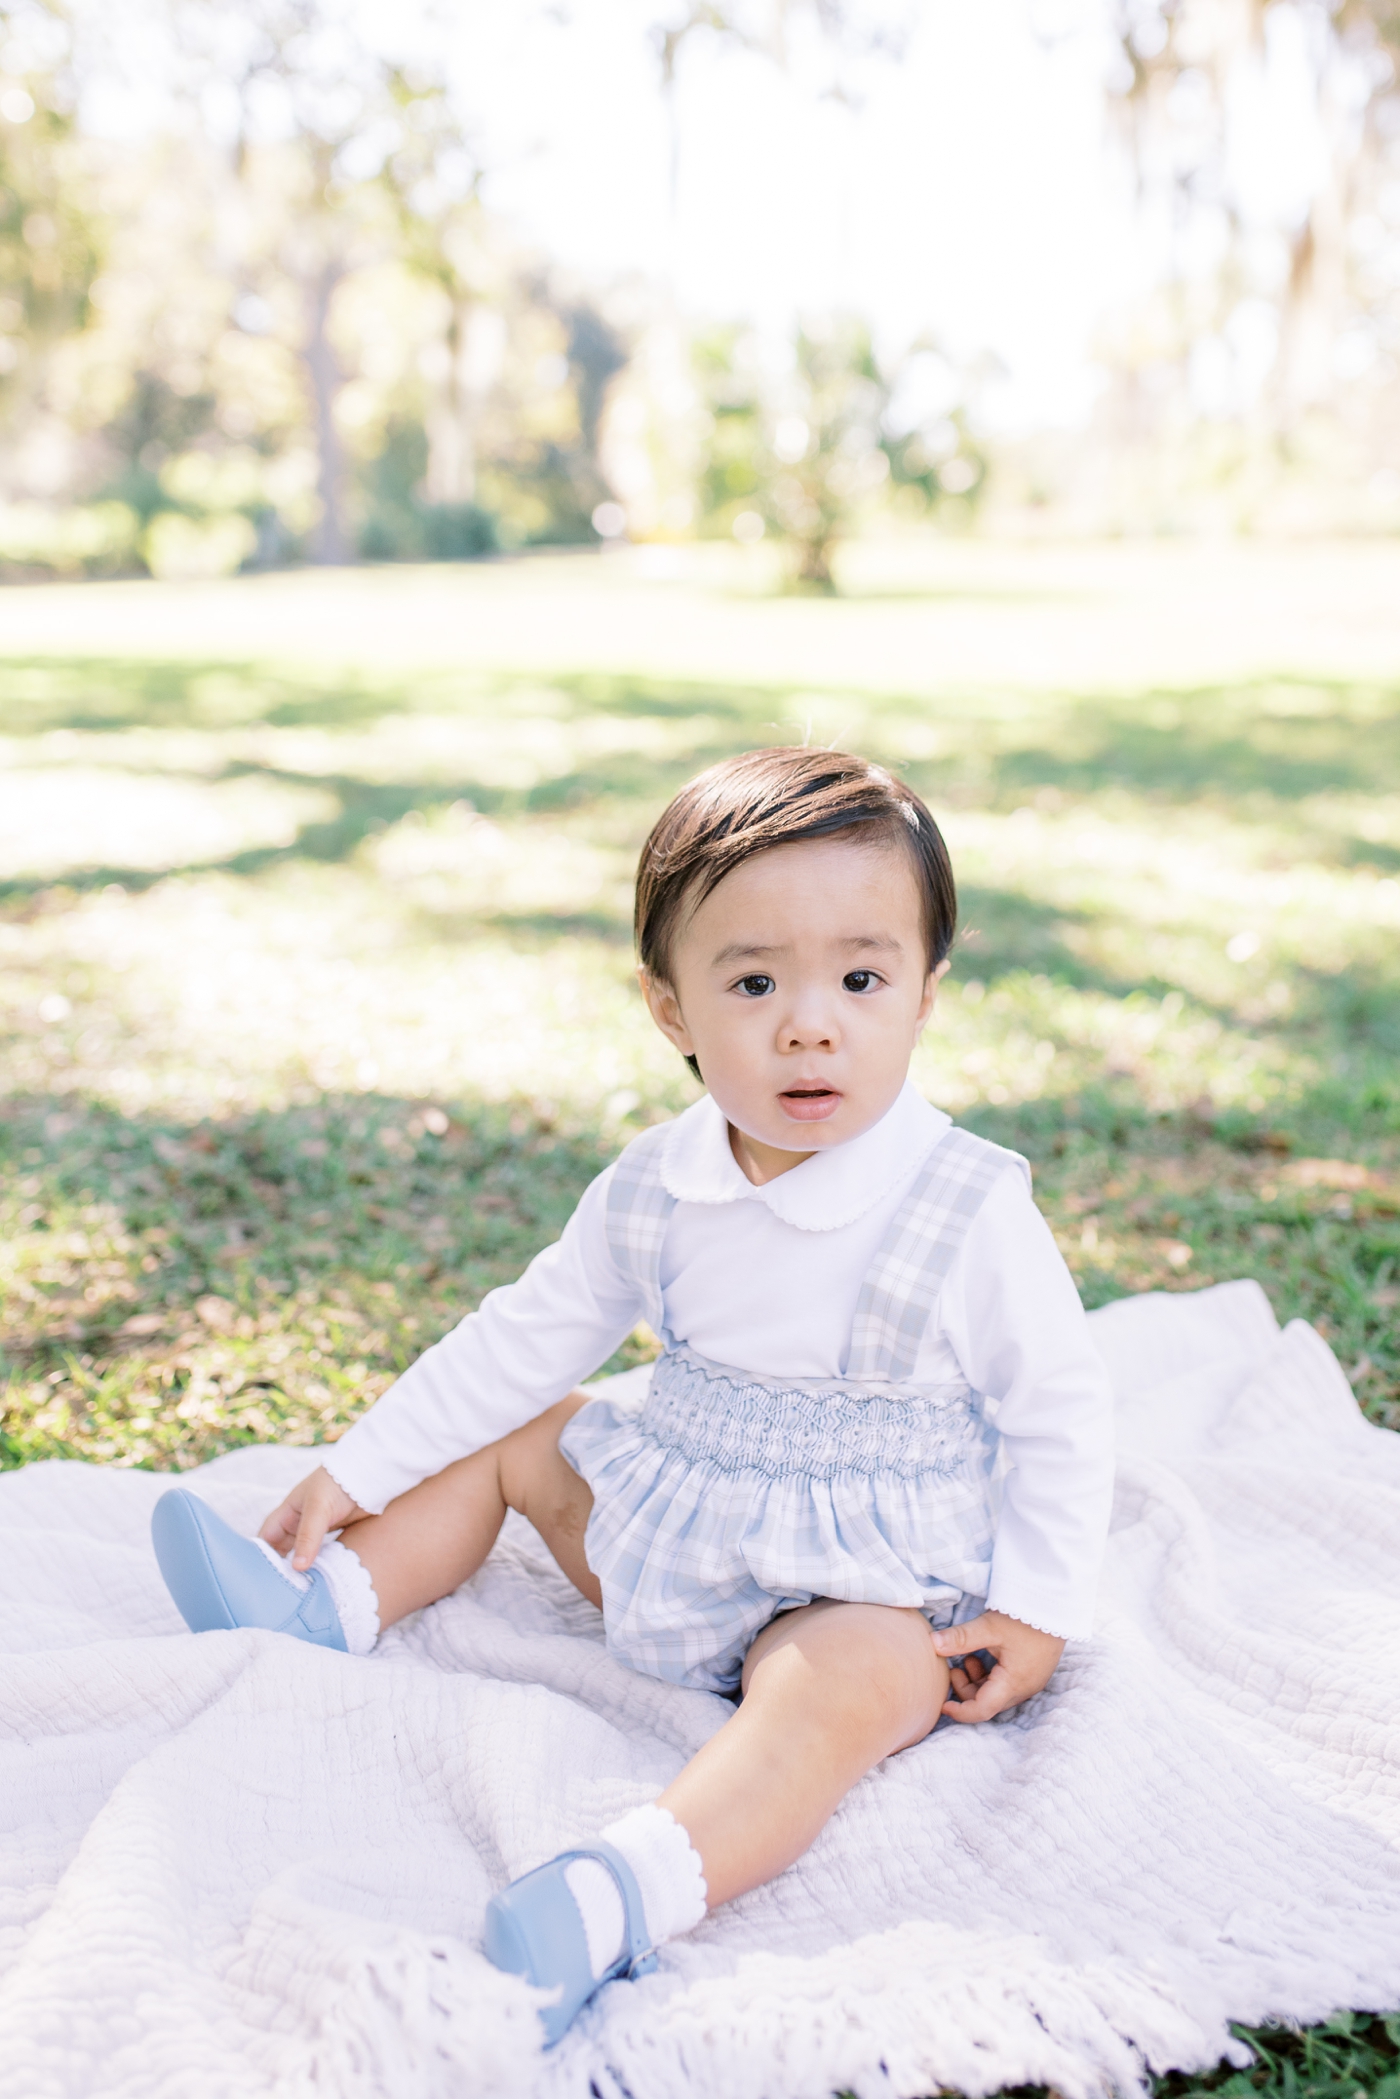 Toddle boy in blue sits on a blanket in Hampton Park for mini session | Photo by Caitlyn Motycka Photography